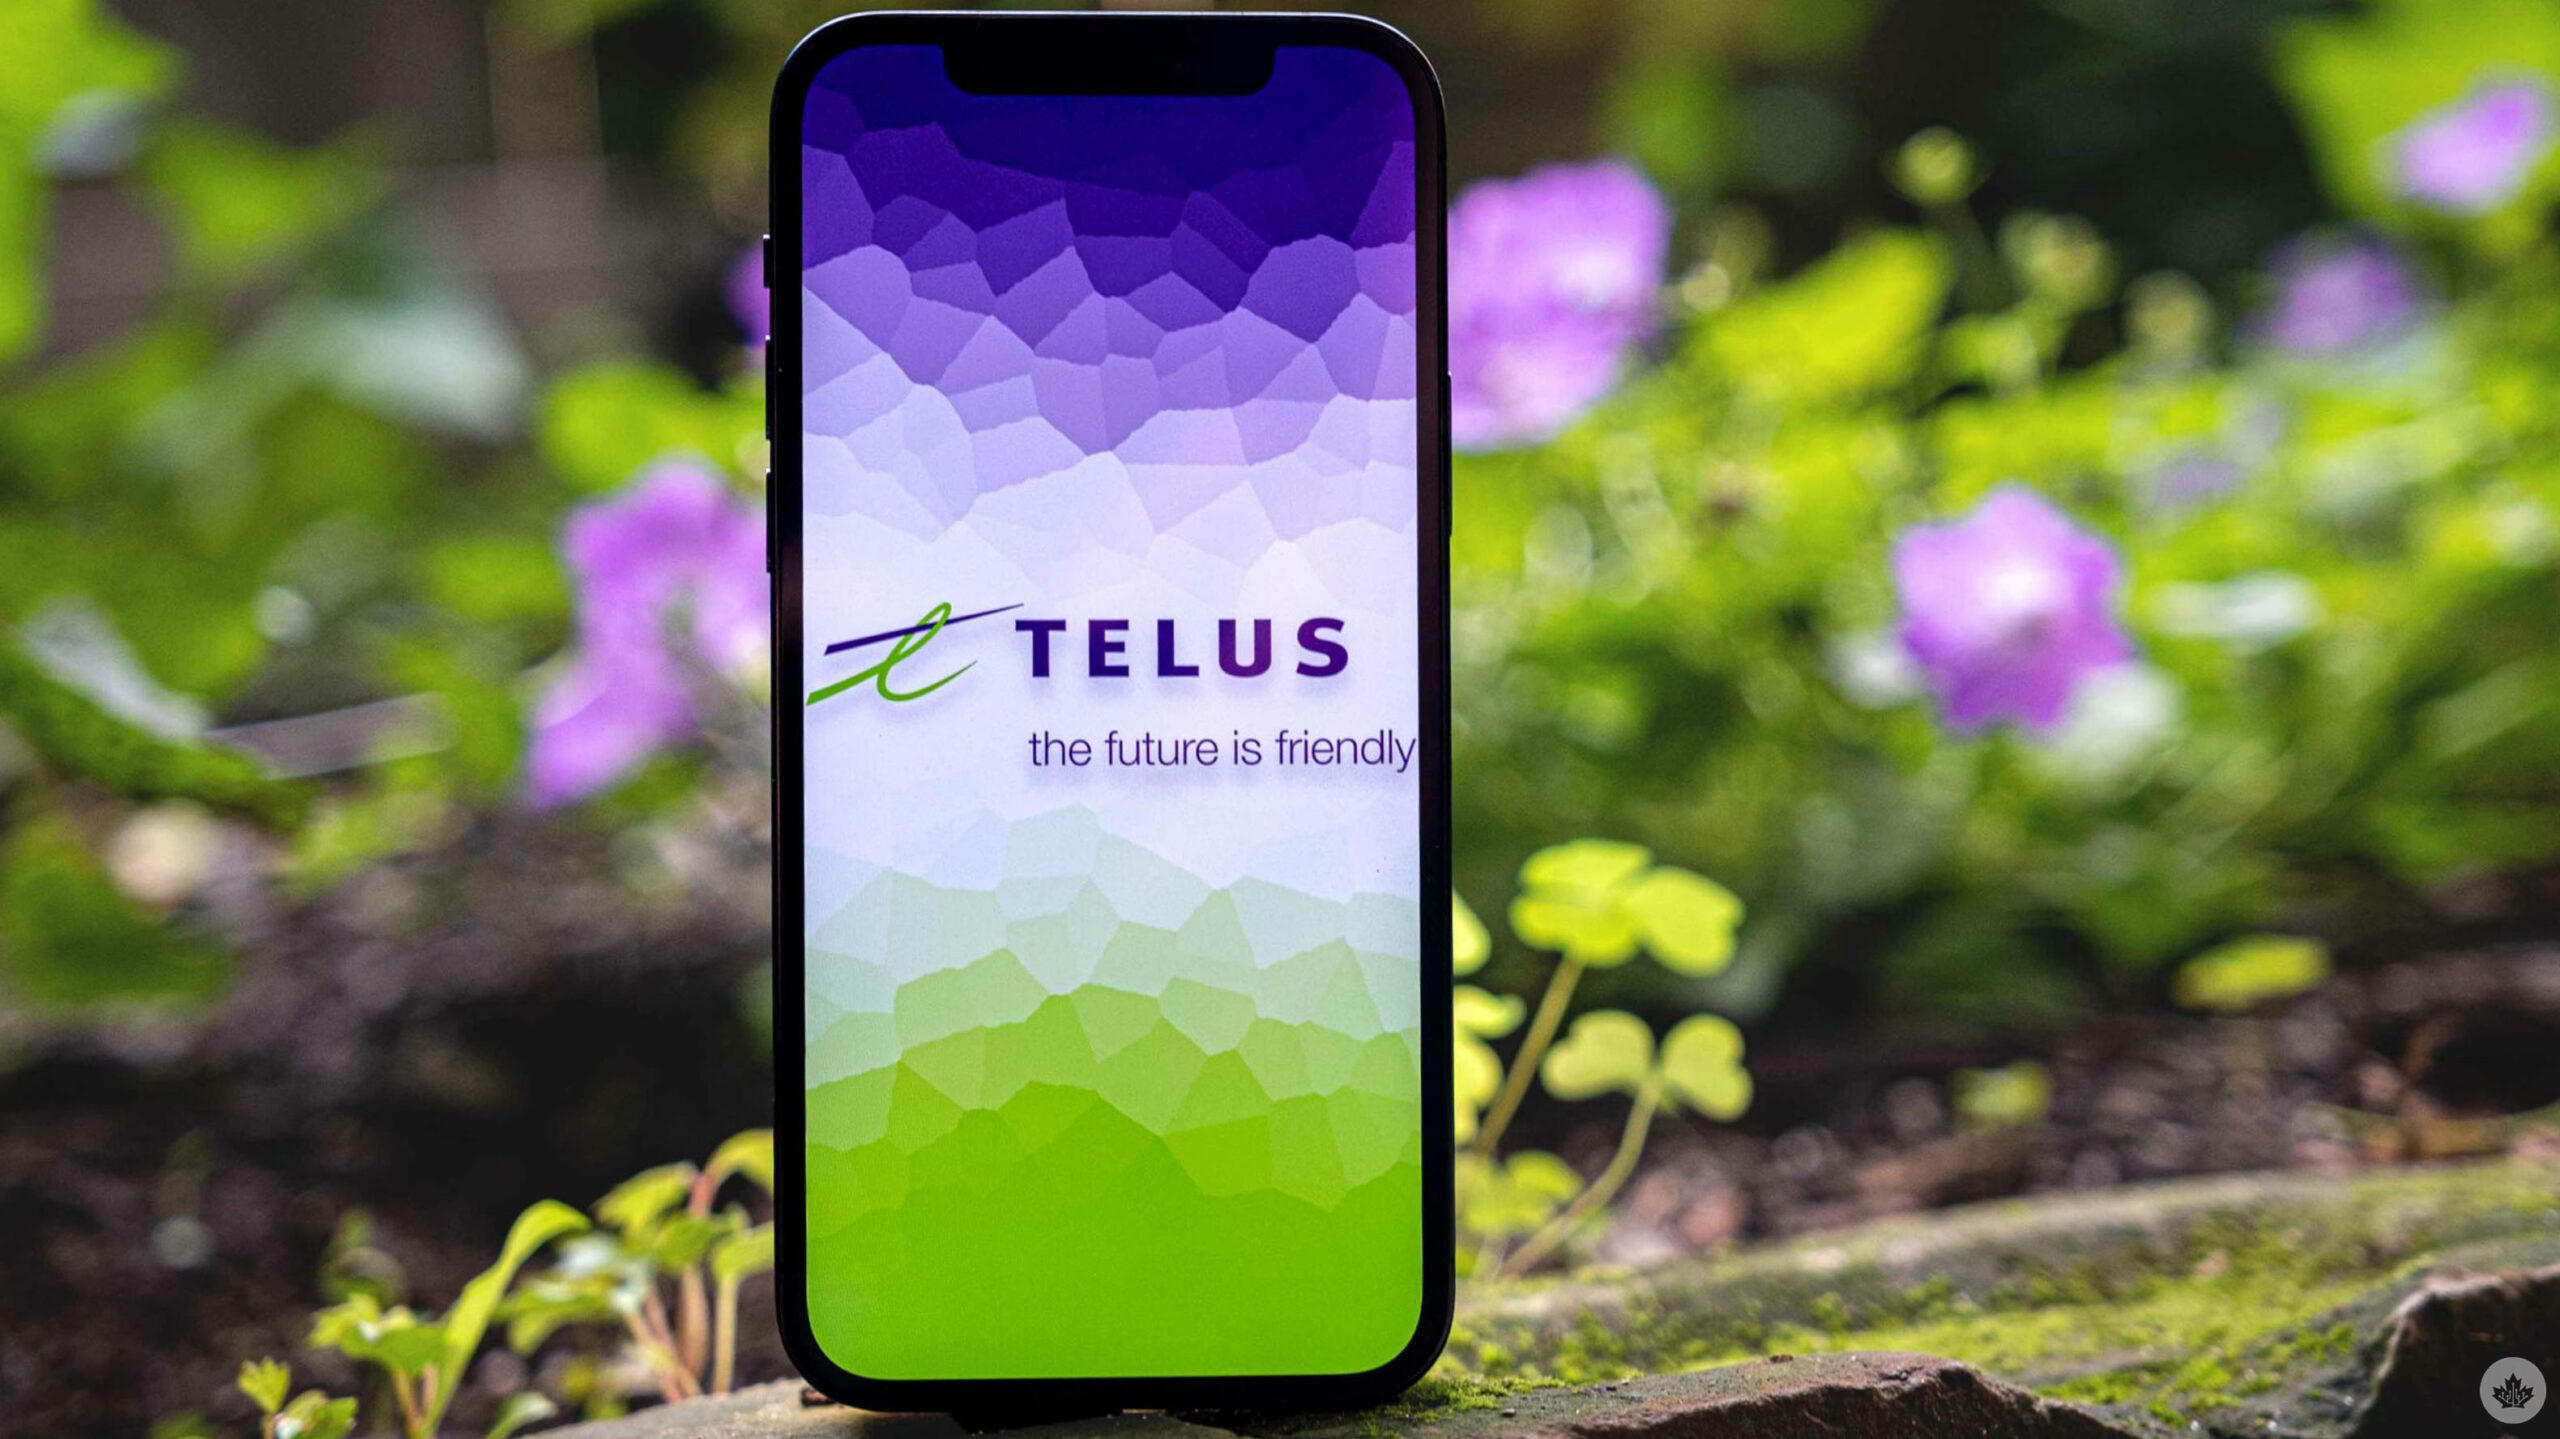 Telus will plant a tree if you buy a phone, as long as it’s not an iPhone